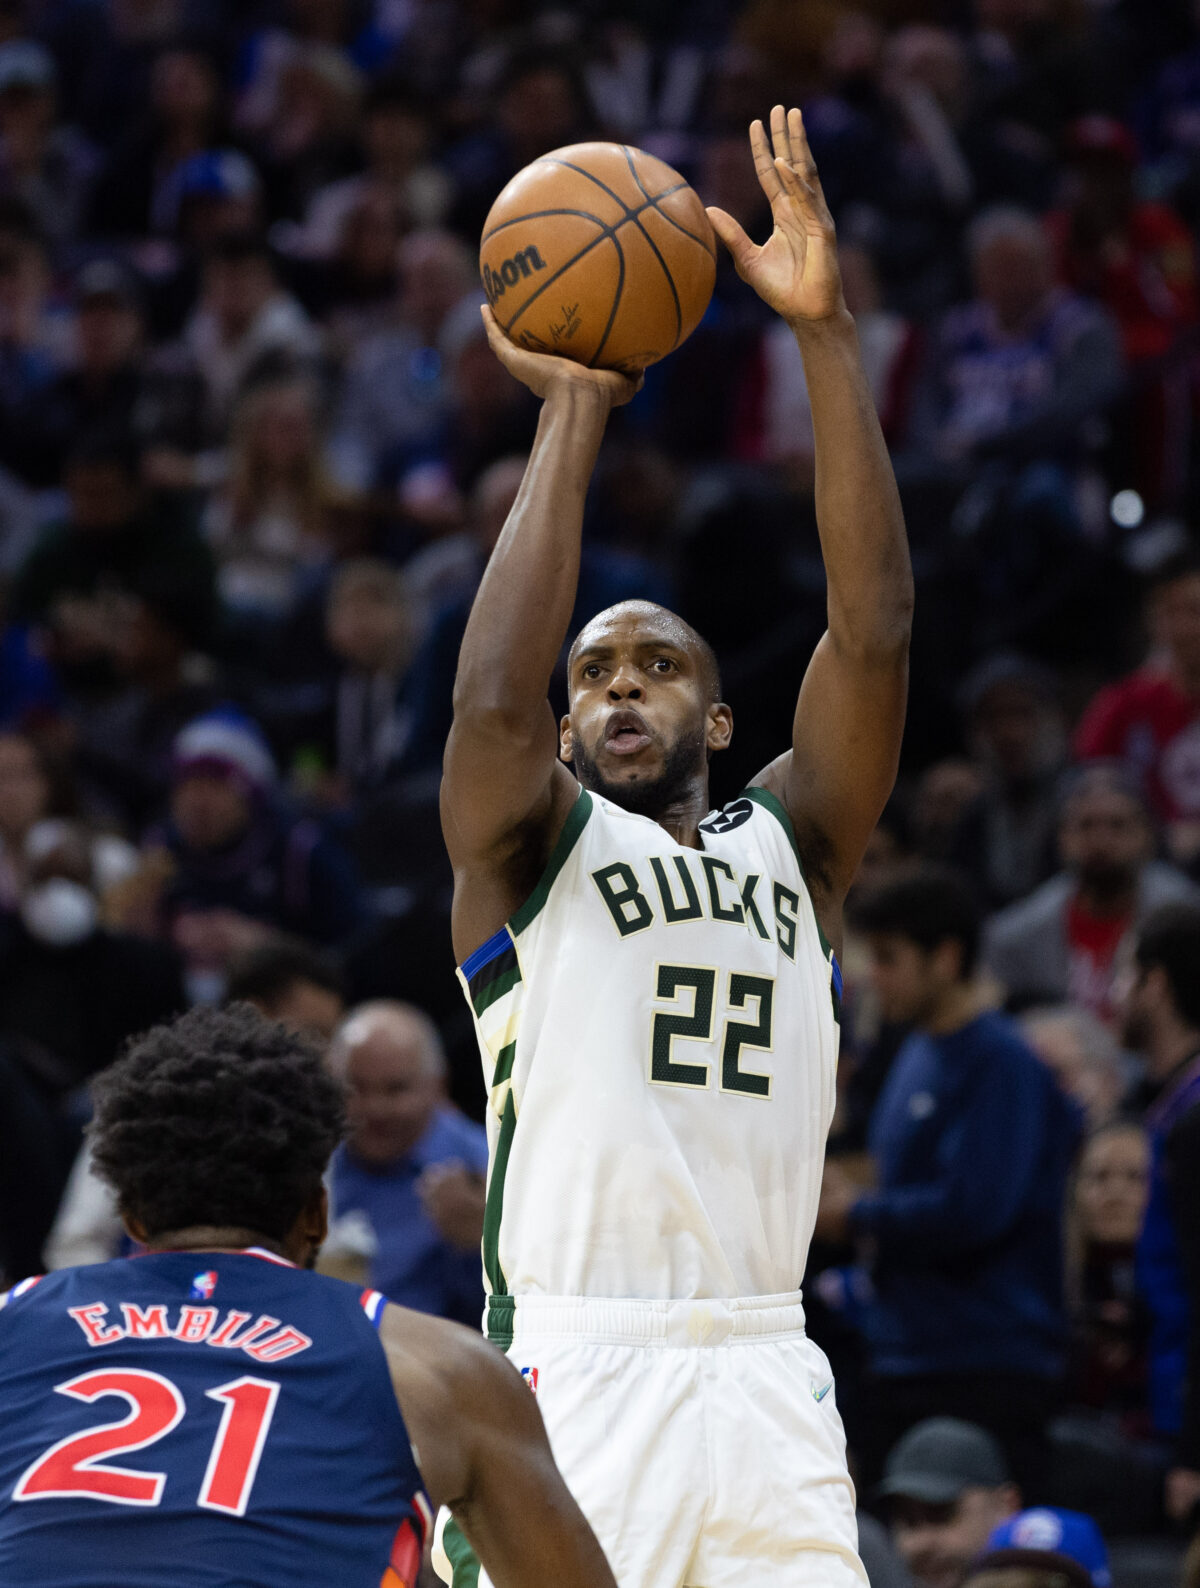 Bucks will be missing All-Star Khris Middleton in matchup vs. Sixers